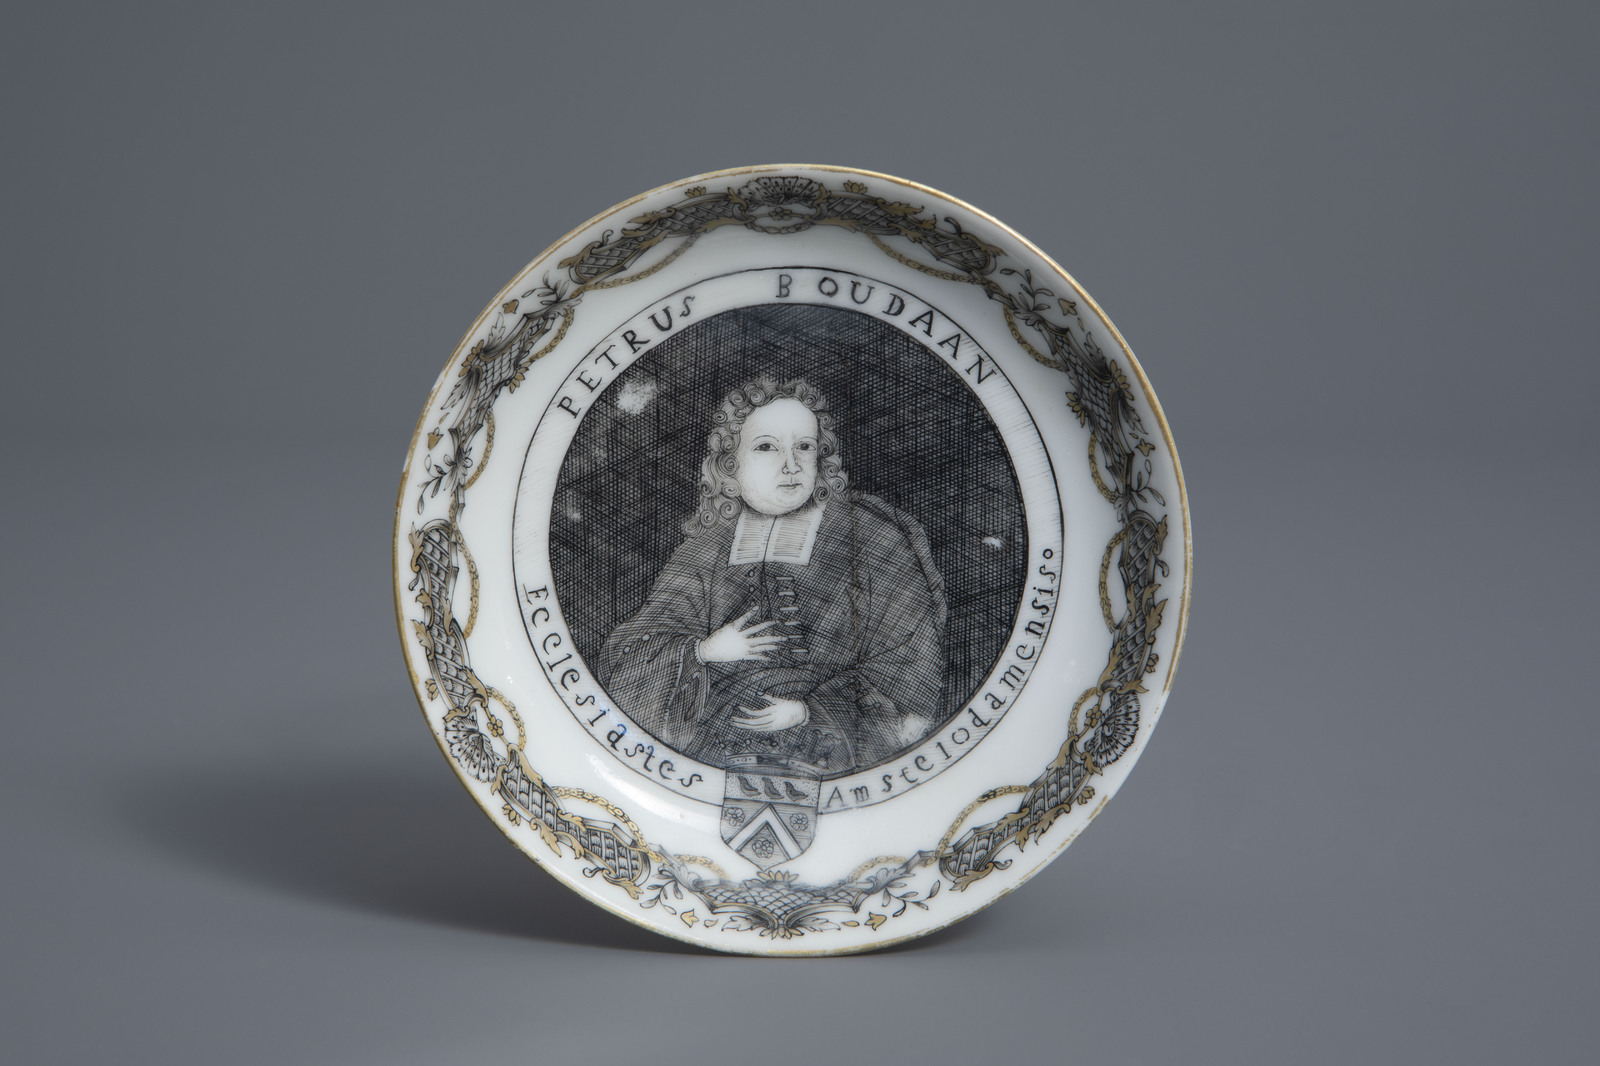 A Chinese grisaille export saucer with the portrait of Petrus Boudaan, Qianlong